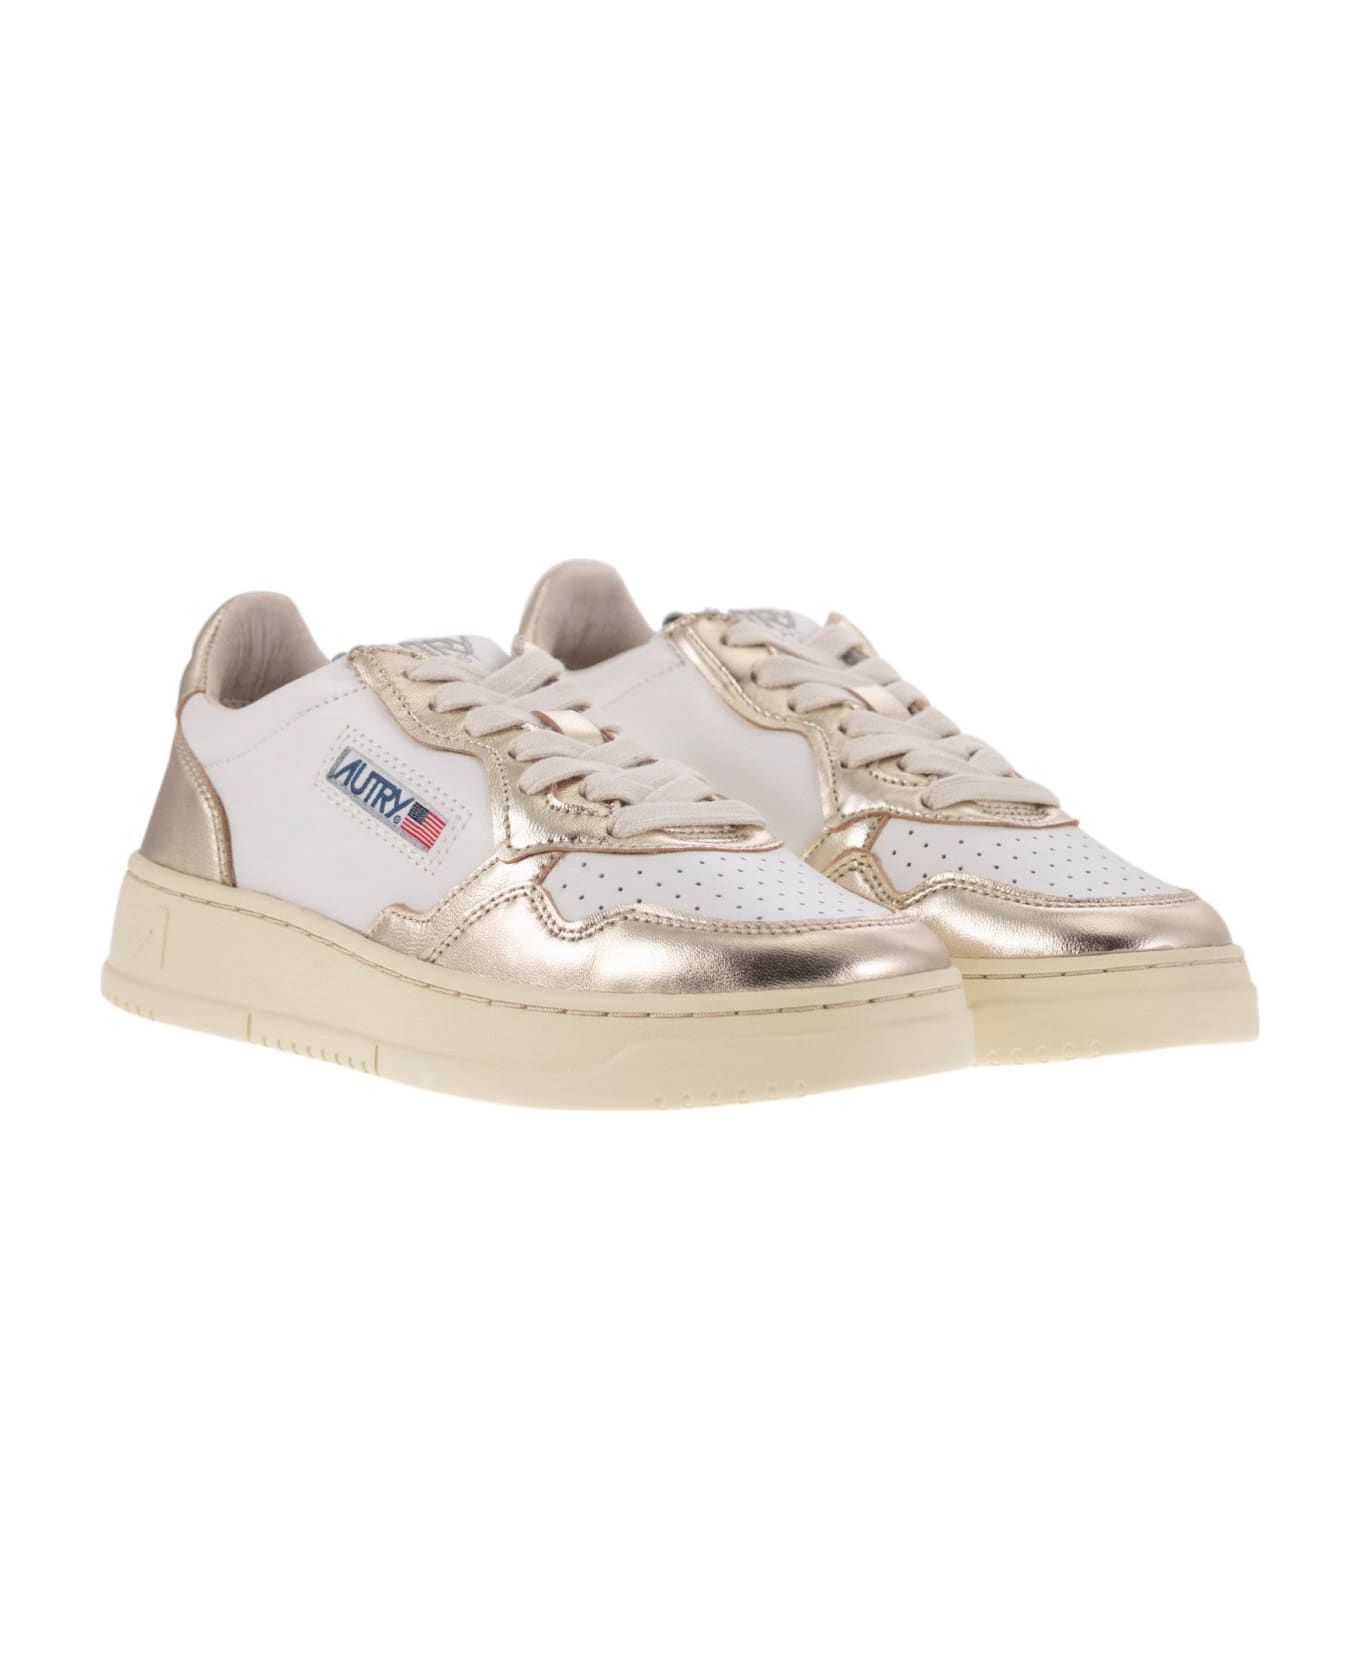 Autry Platinum And White Two-tone Leather Medalist Low Sneakers - Platino スニーカー